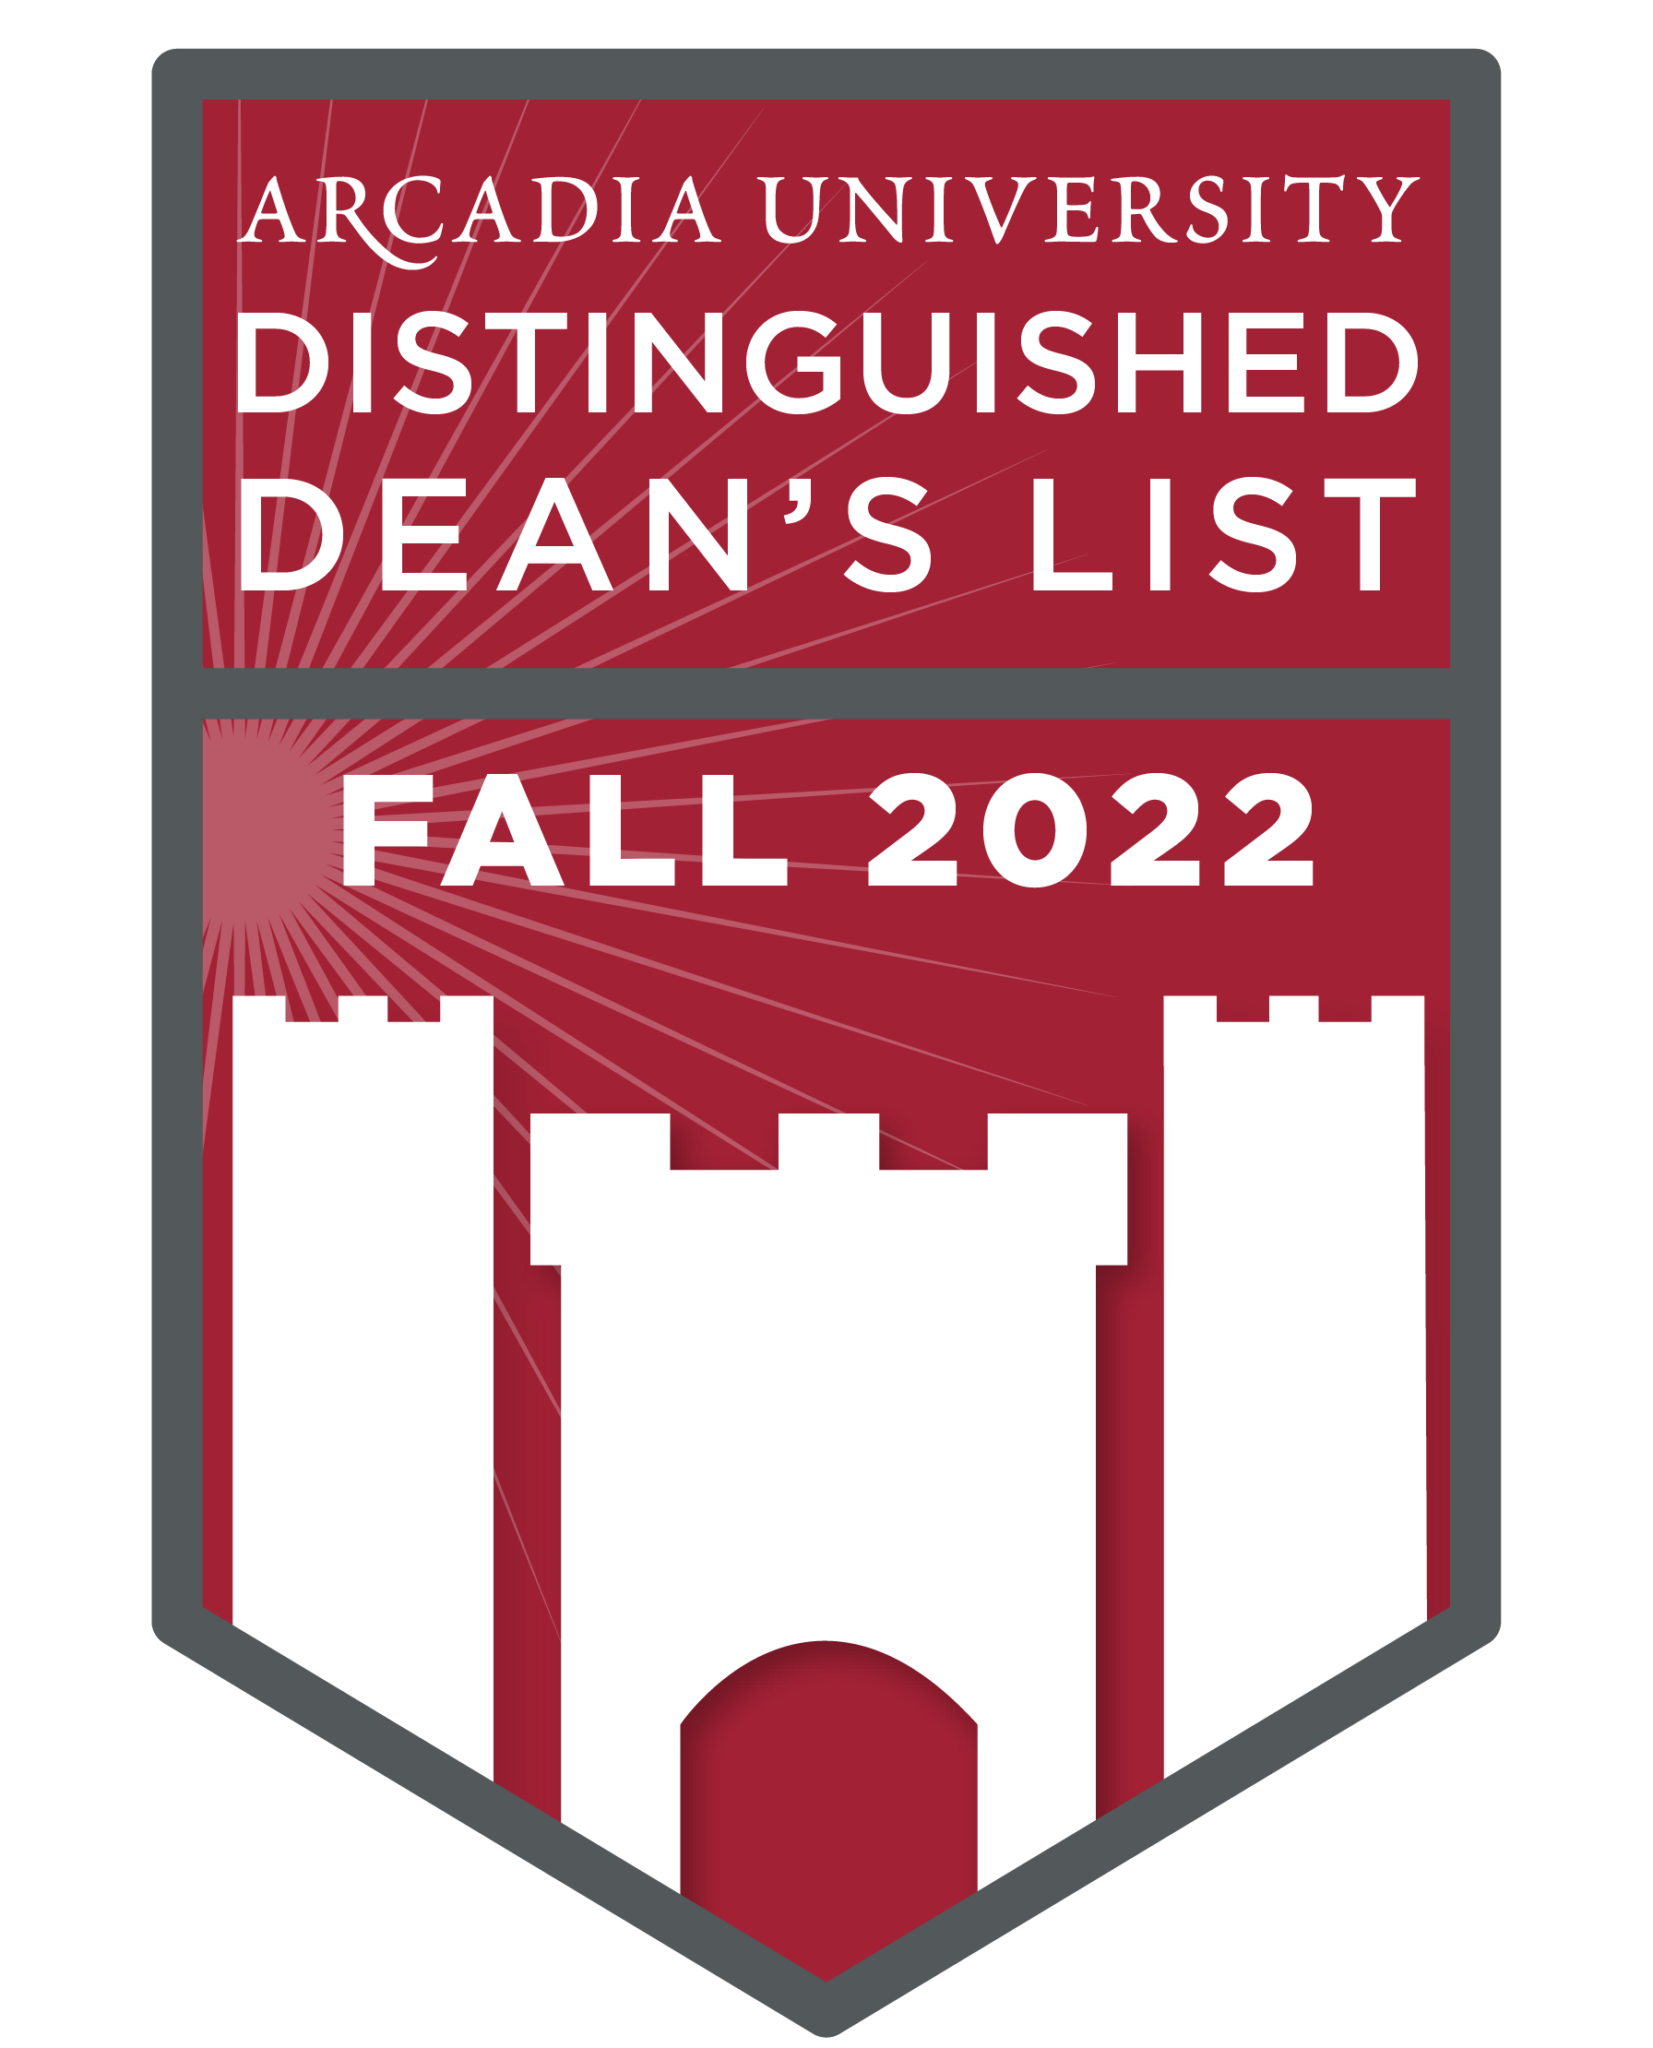 The badge for the fall of 2022 Honors Distinguished Deans List at Arcadia.